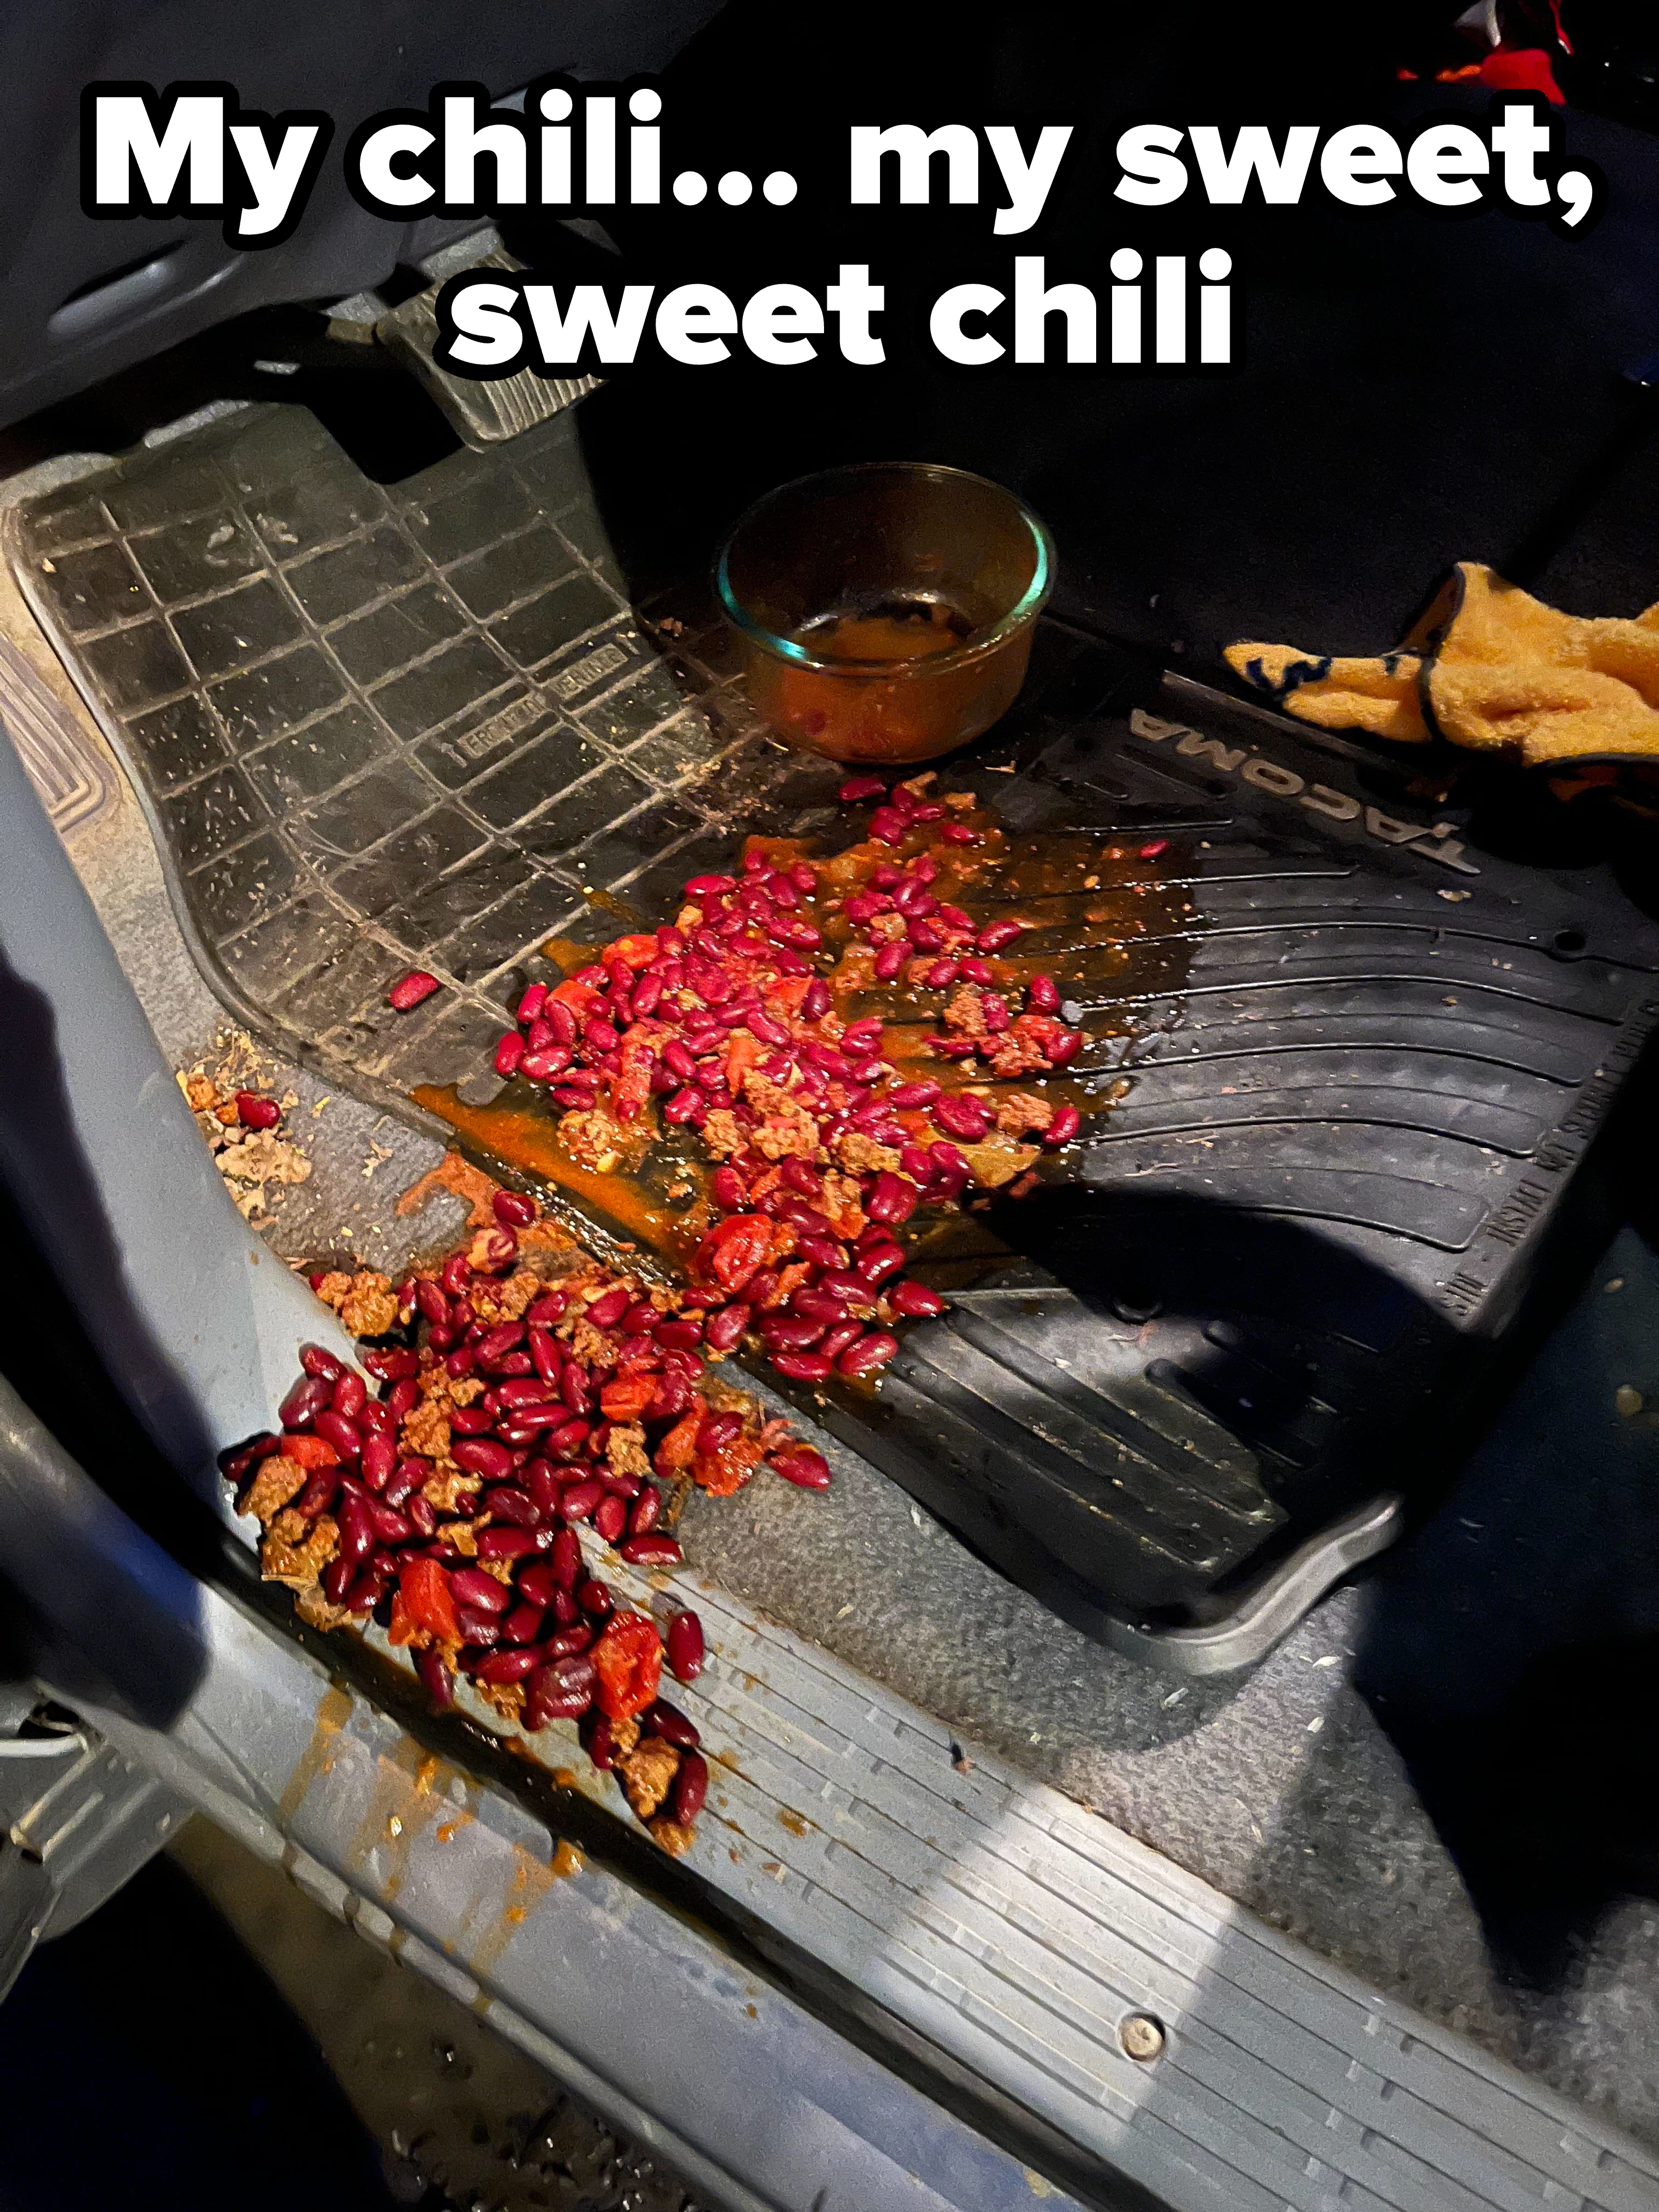 spilled chili in a car